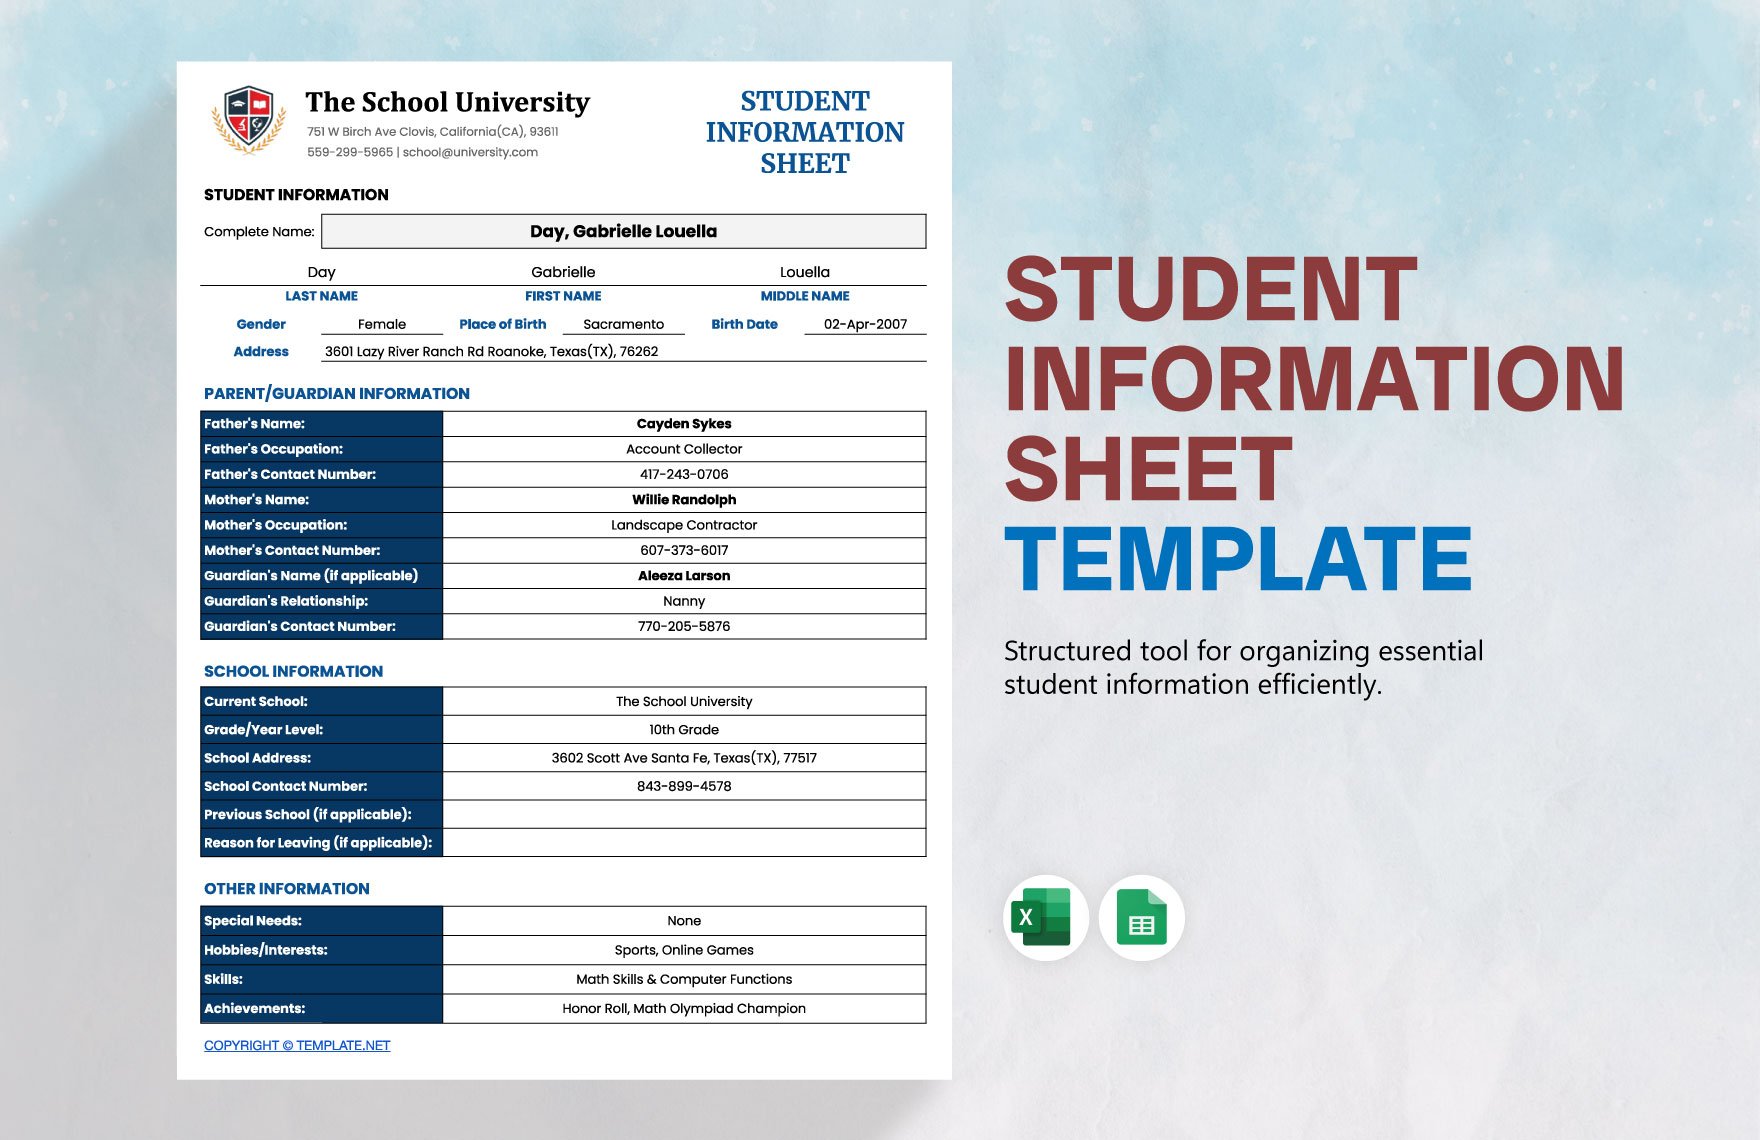 Student Information Sheet Template in Excel, Google Sheets